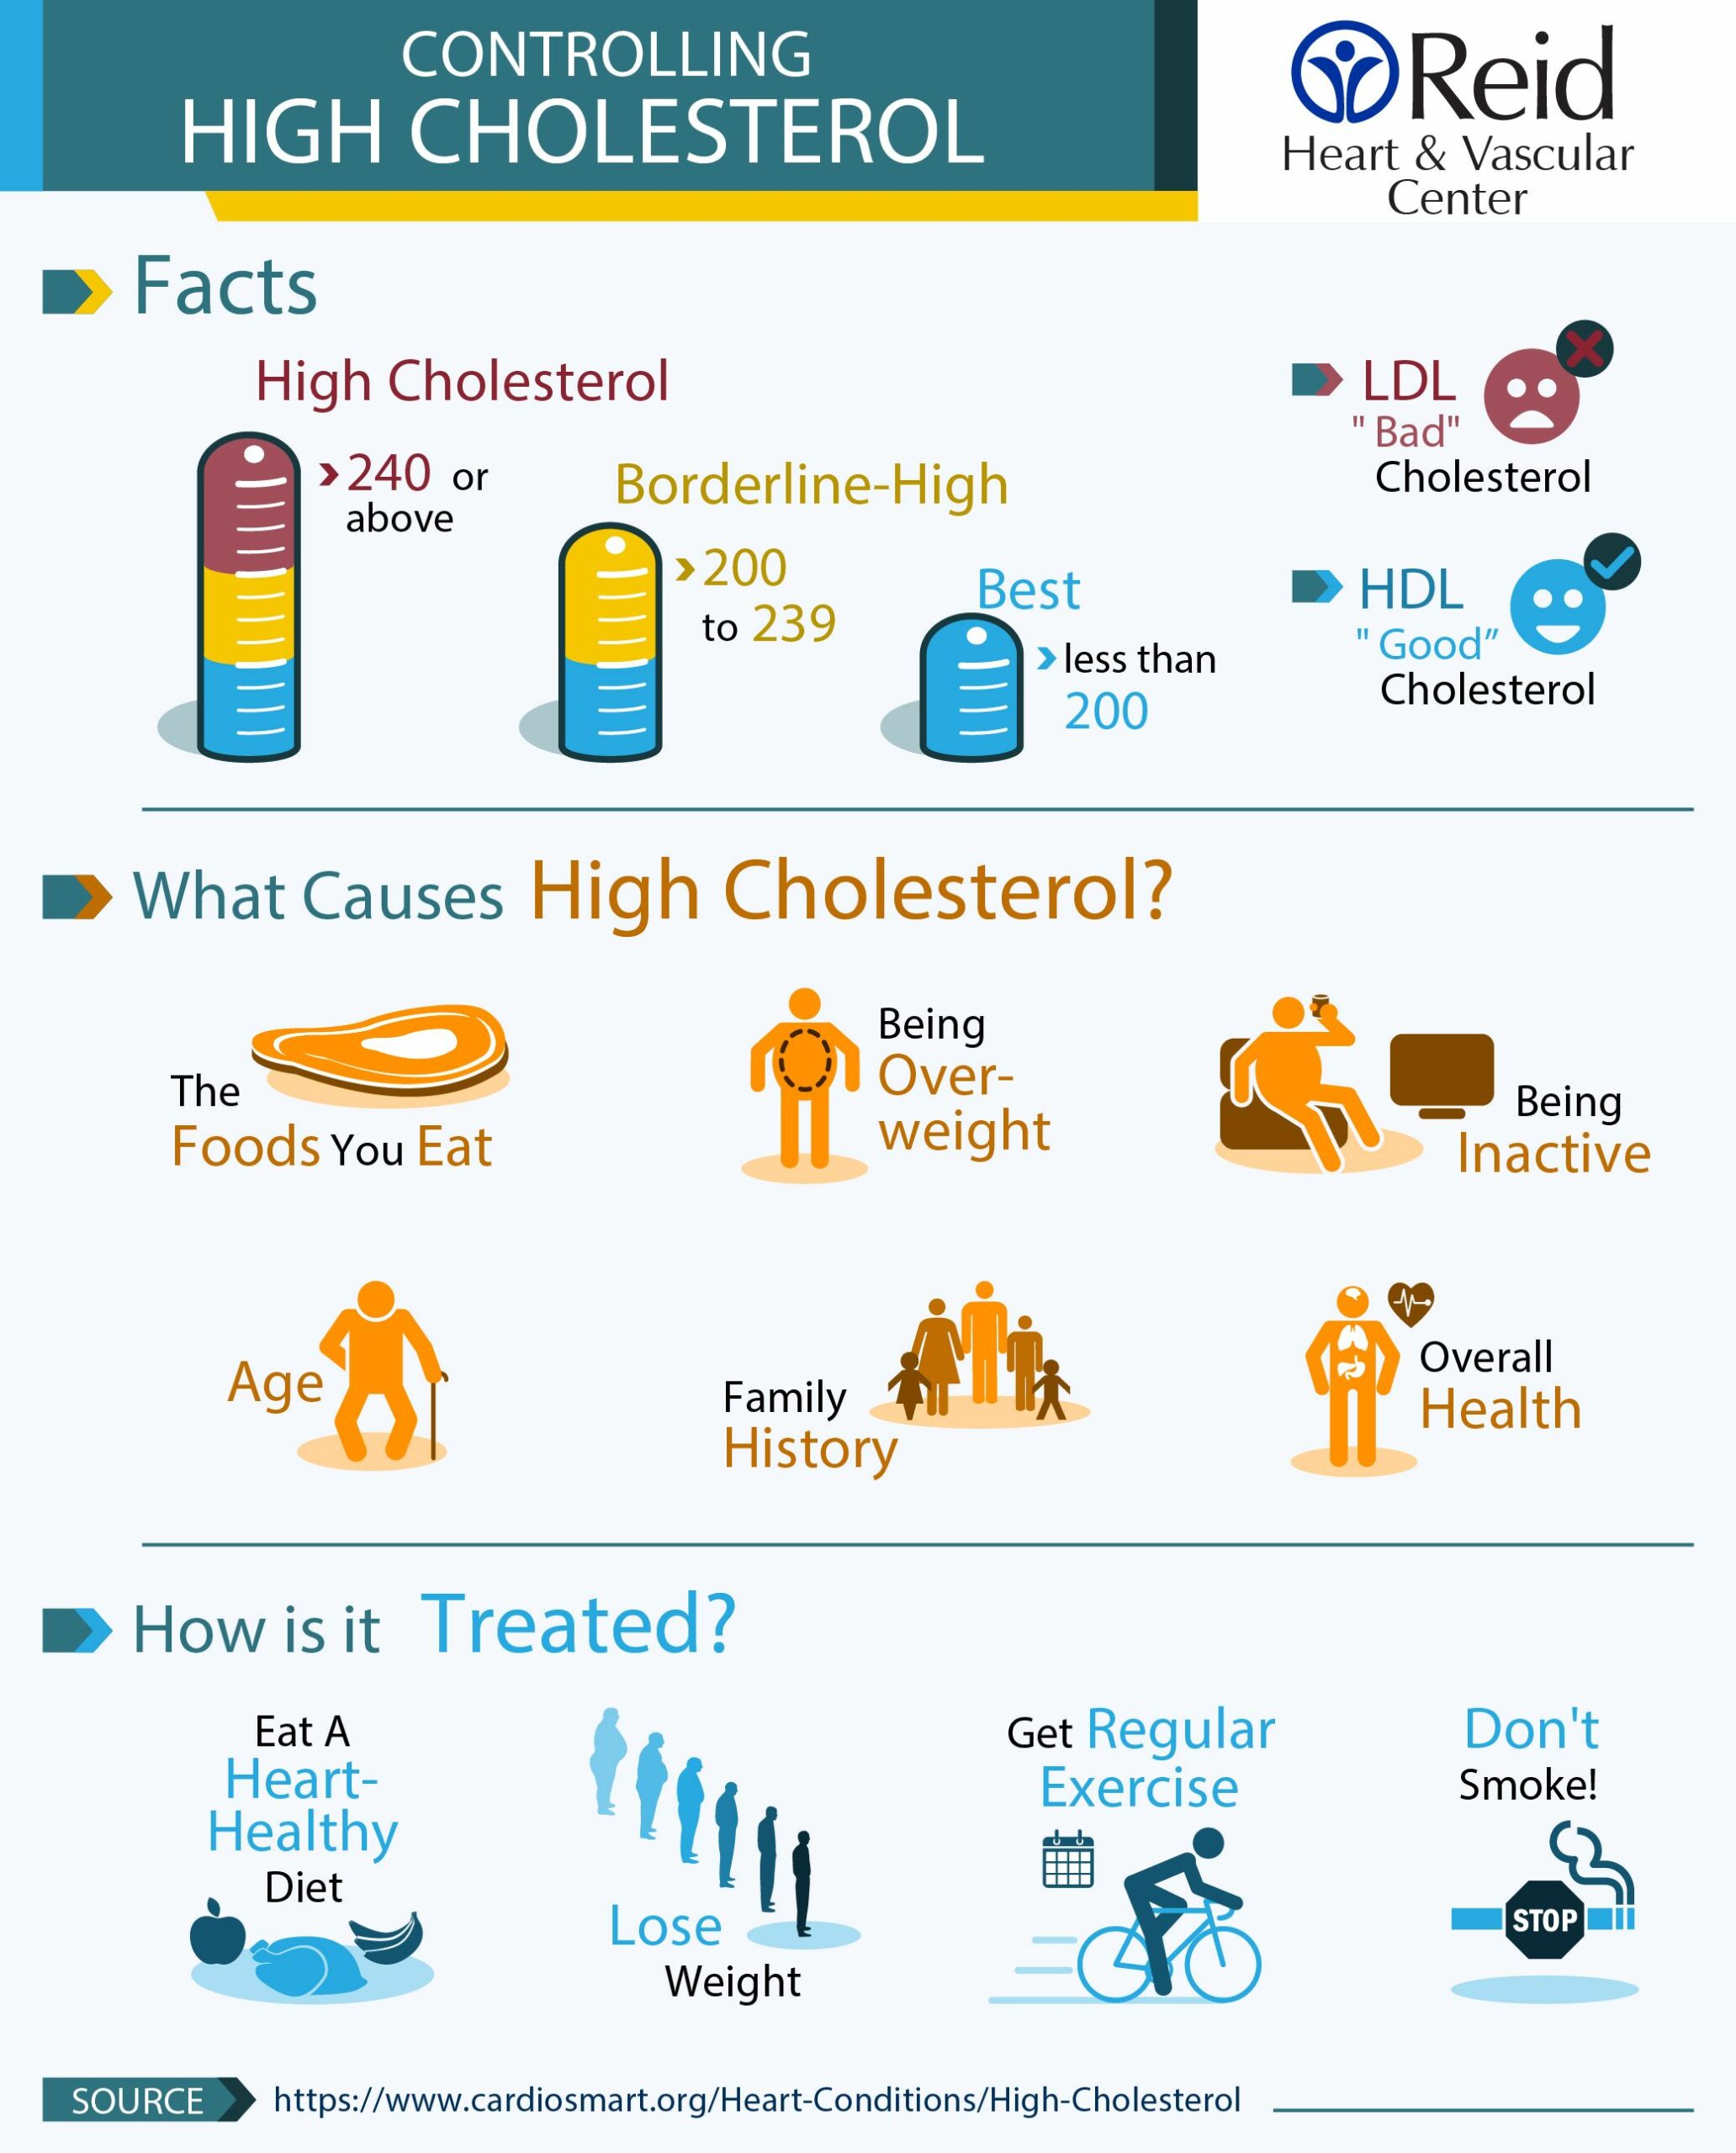 Lowering Cholesterol 101: Expert Tips And Tricks For A Healthier You